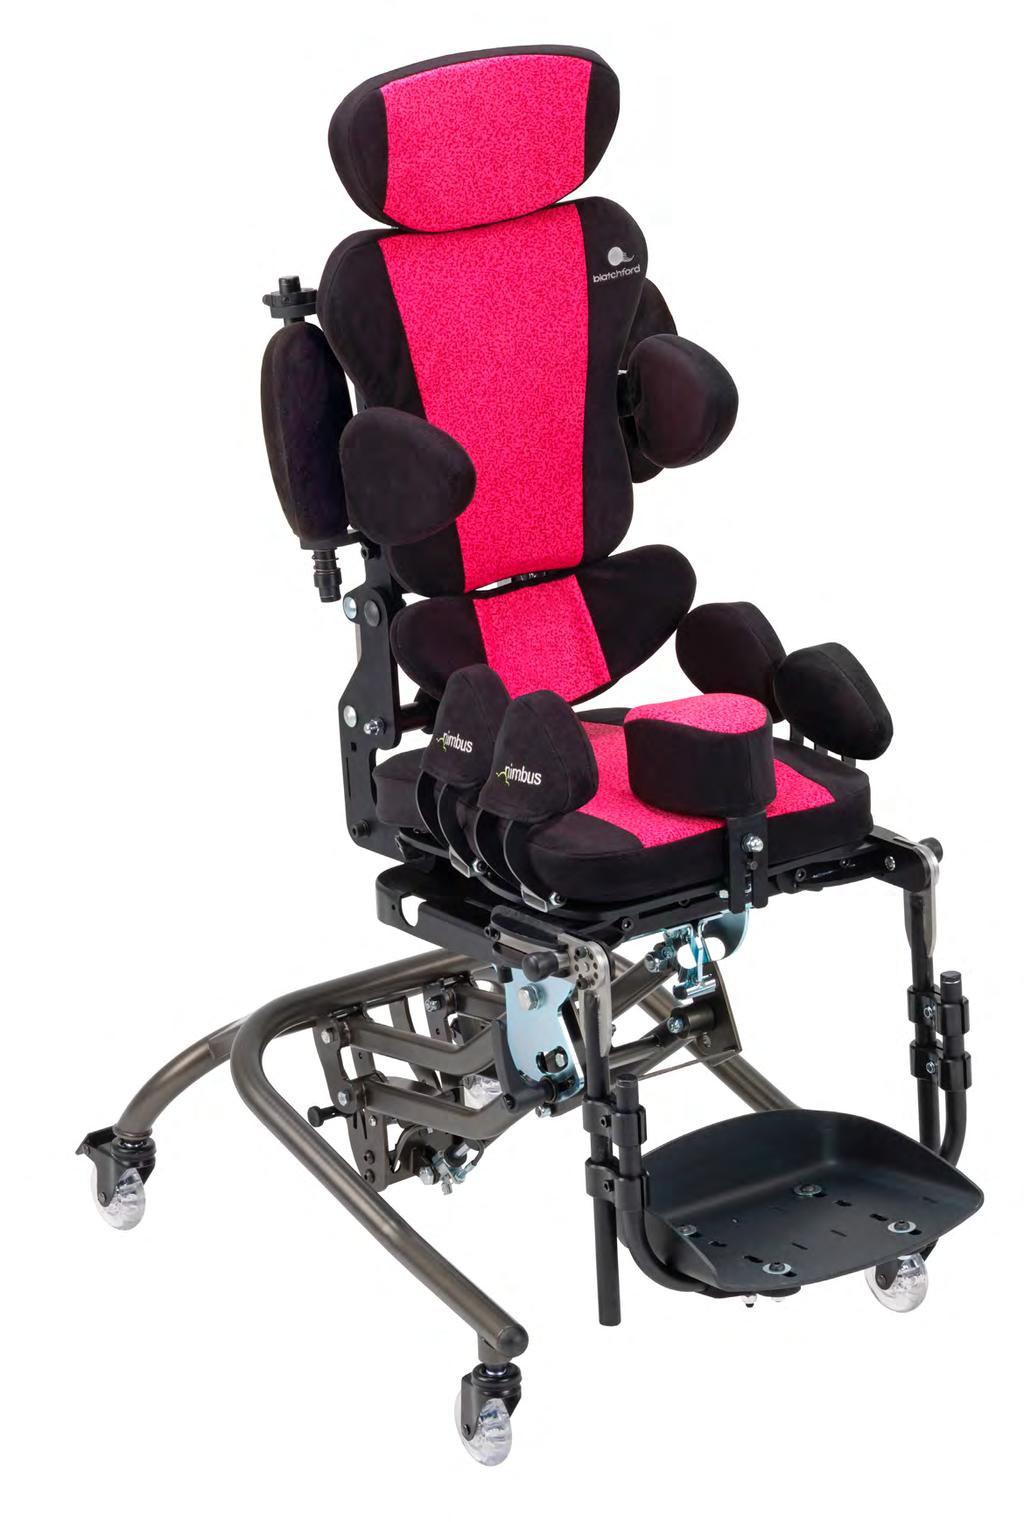 Options include a standard, curved or anti-roll headrest. The back rest is curved to meet the contour of the body for improved comfort.